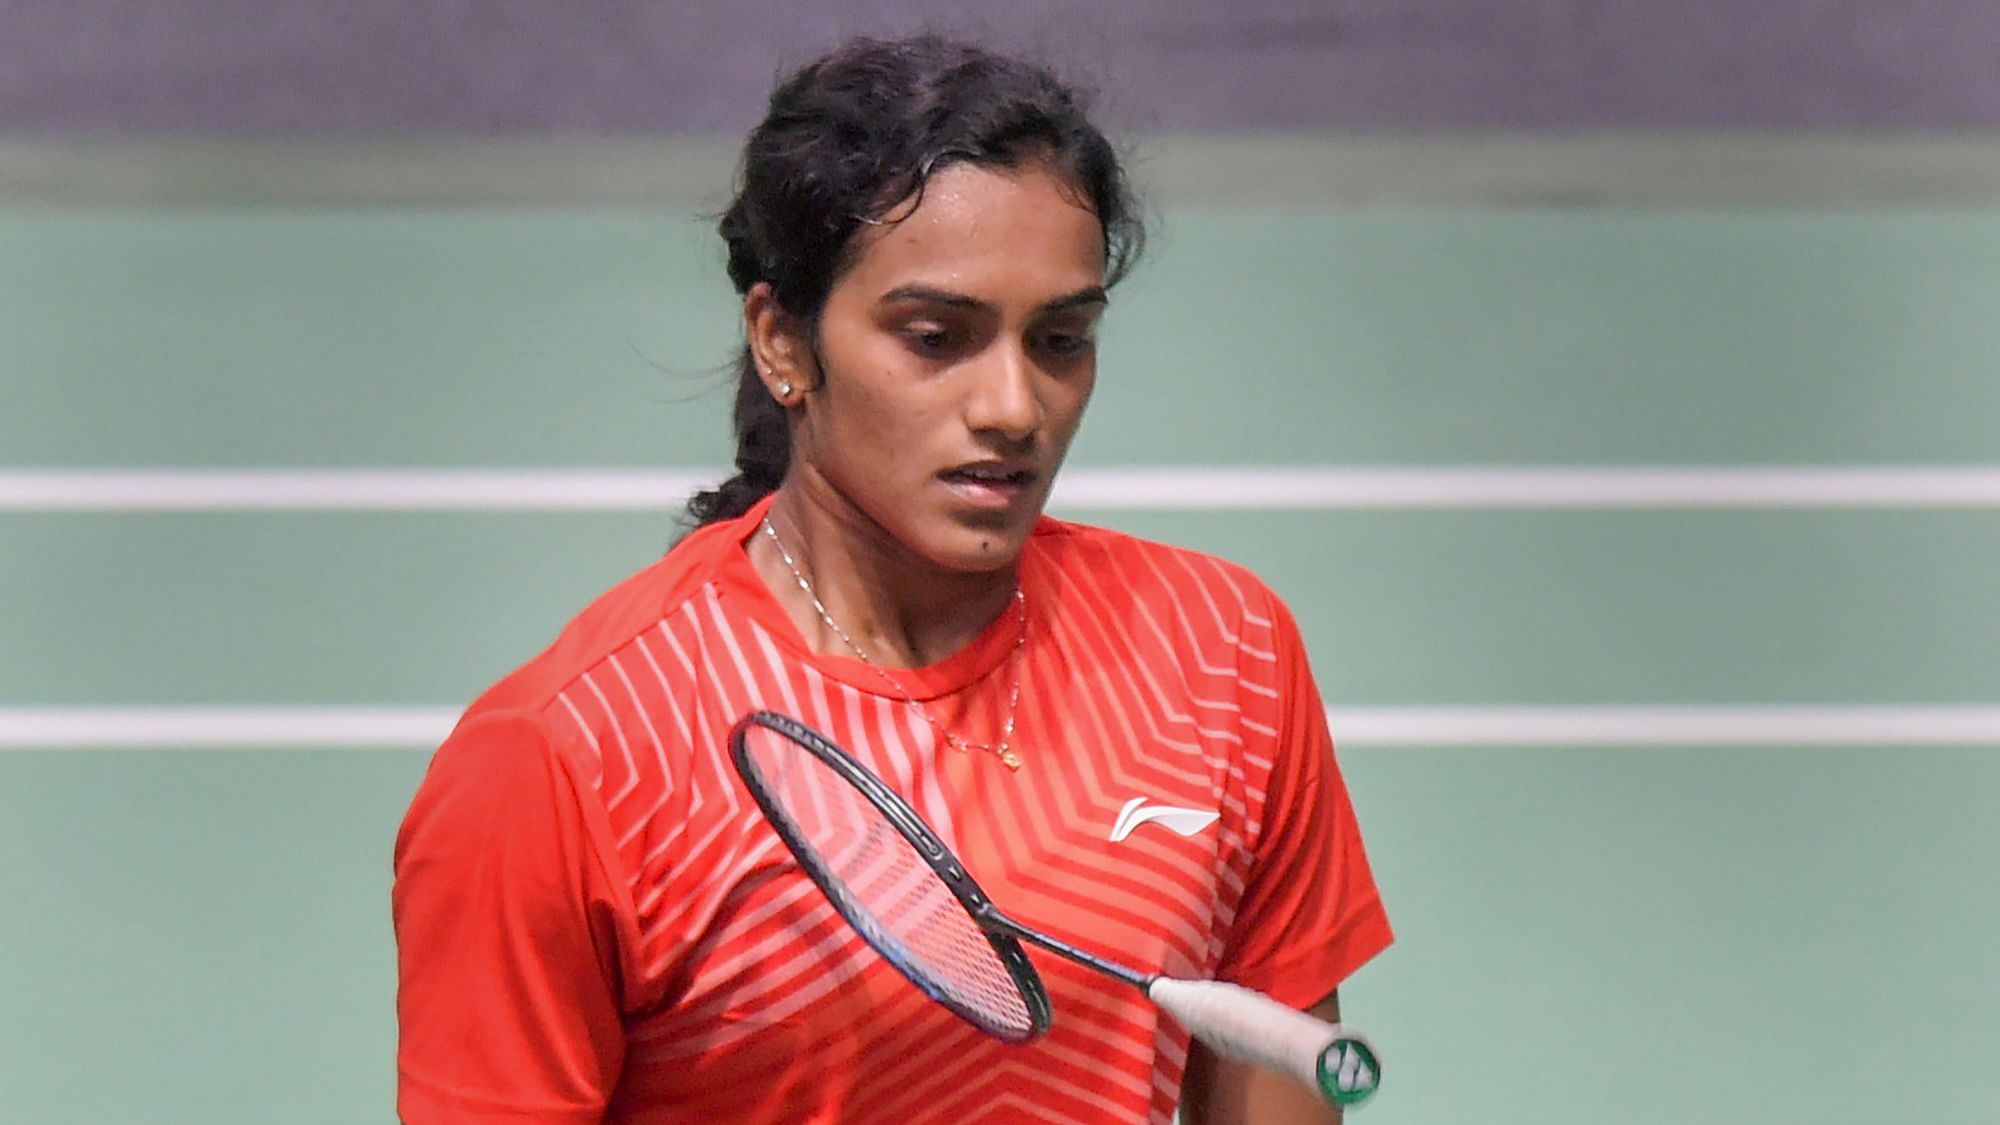 PV Sindhu has been knocked out in the quarter-finals of the China Open.